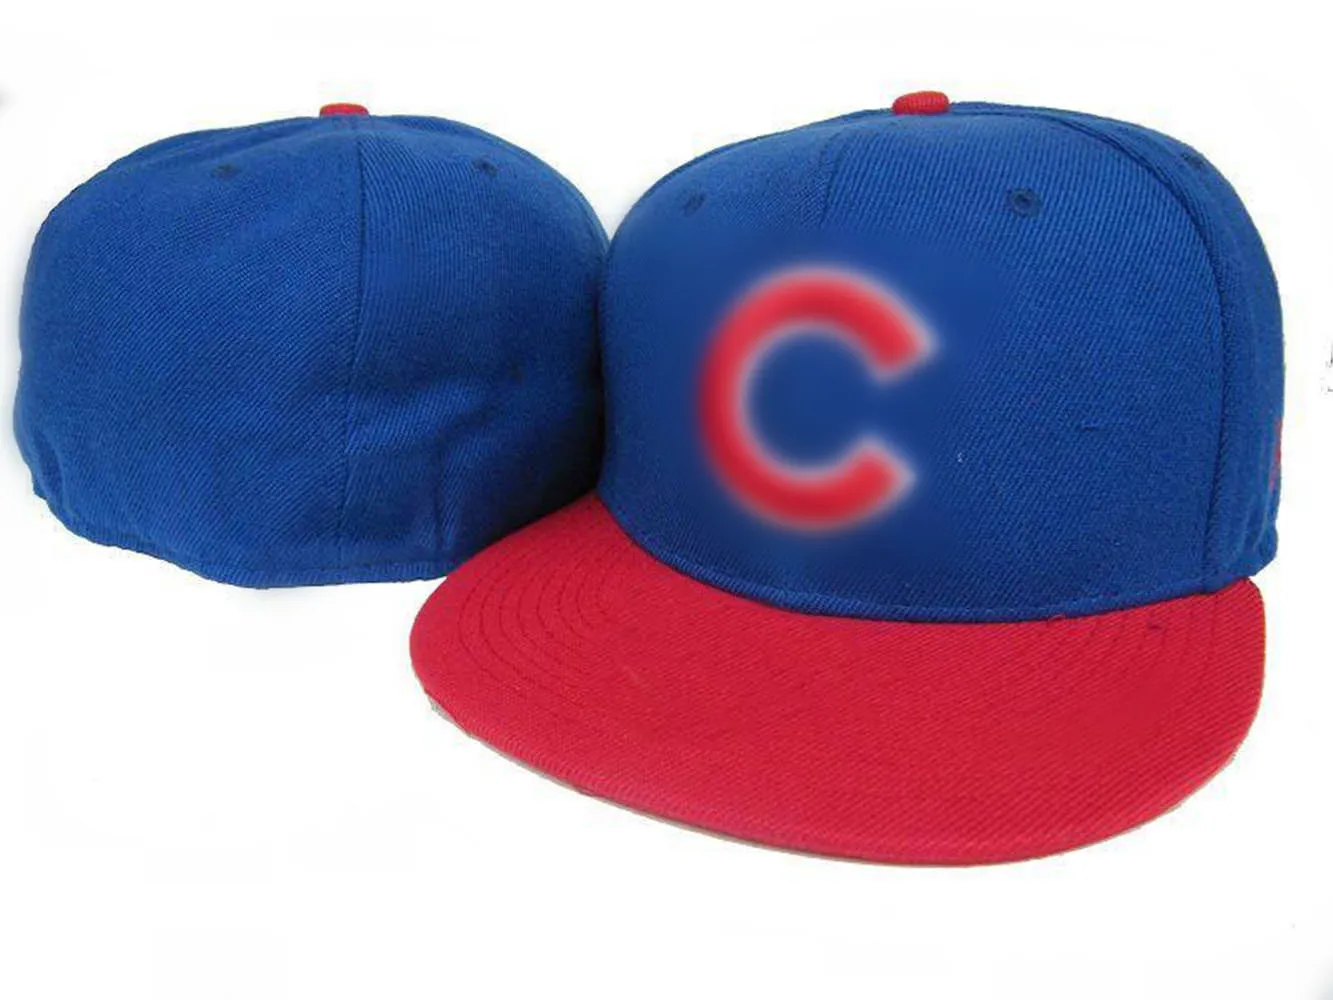 New Design Cubs C Letter Baseball Caps 브랜드 최신 남성 여성 Gorras 힙합 Casquette Flat Fitted Hats H9-7.13